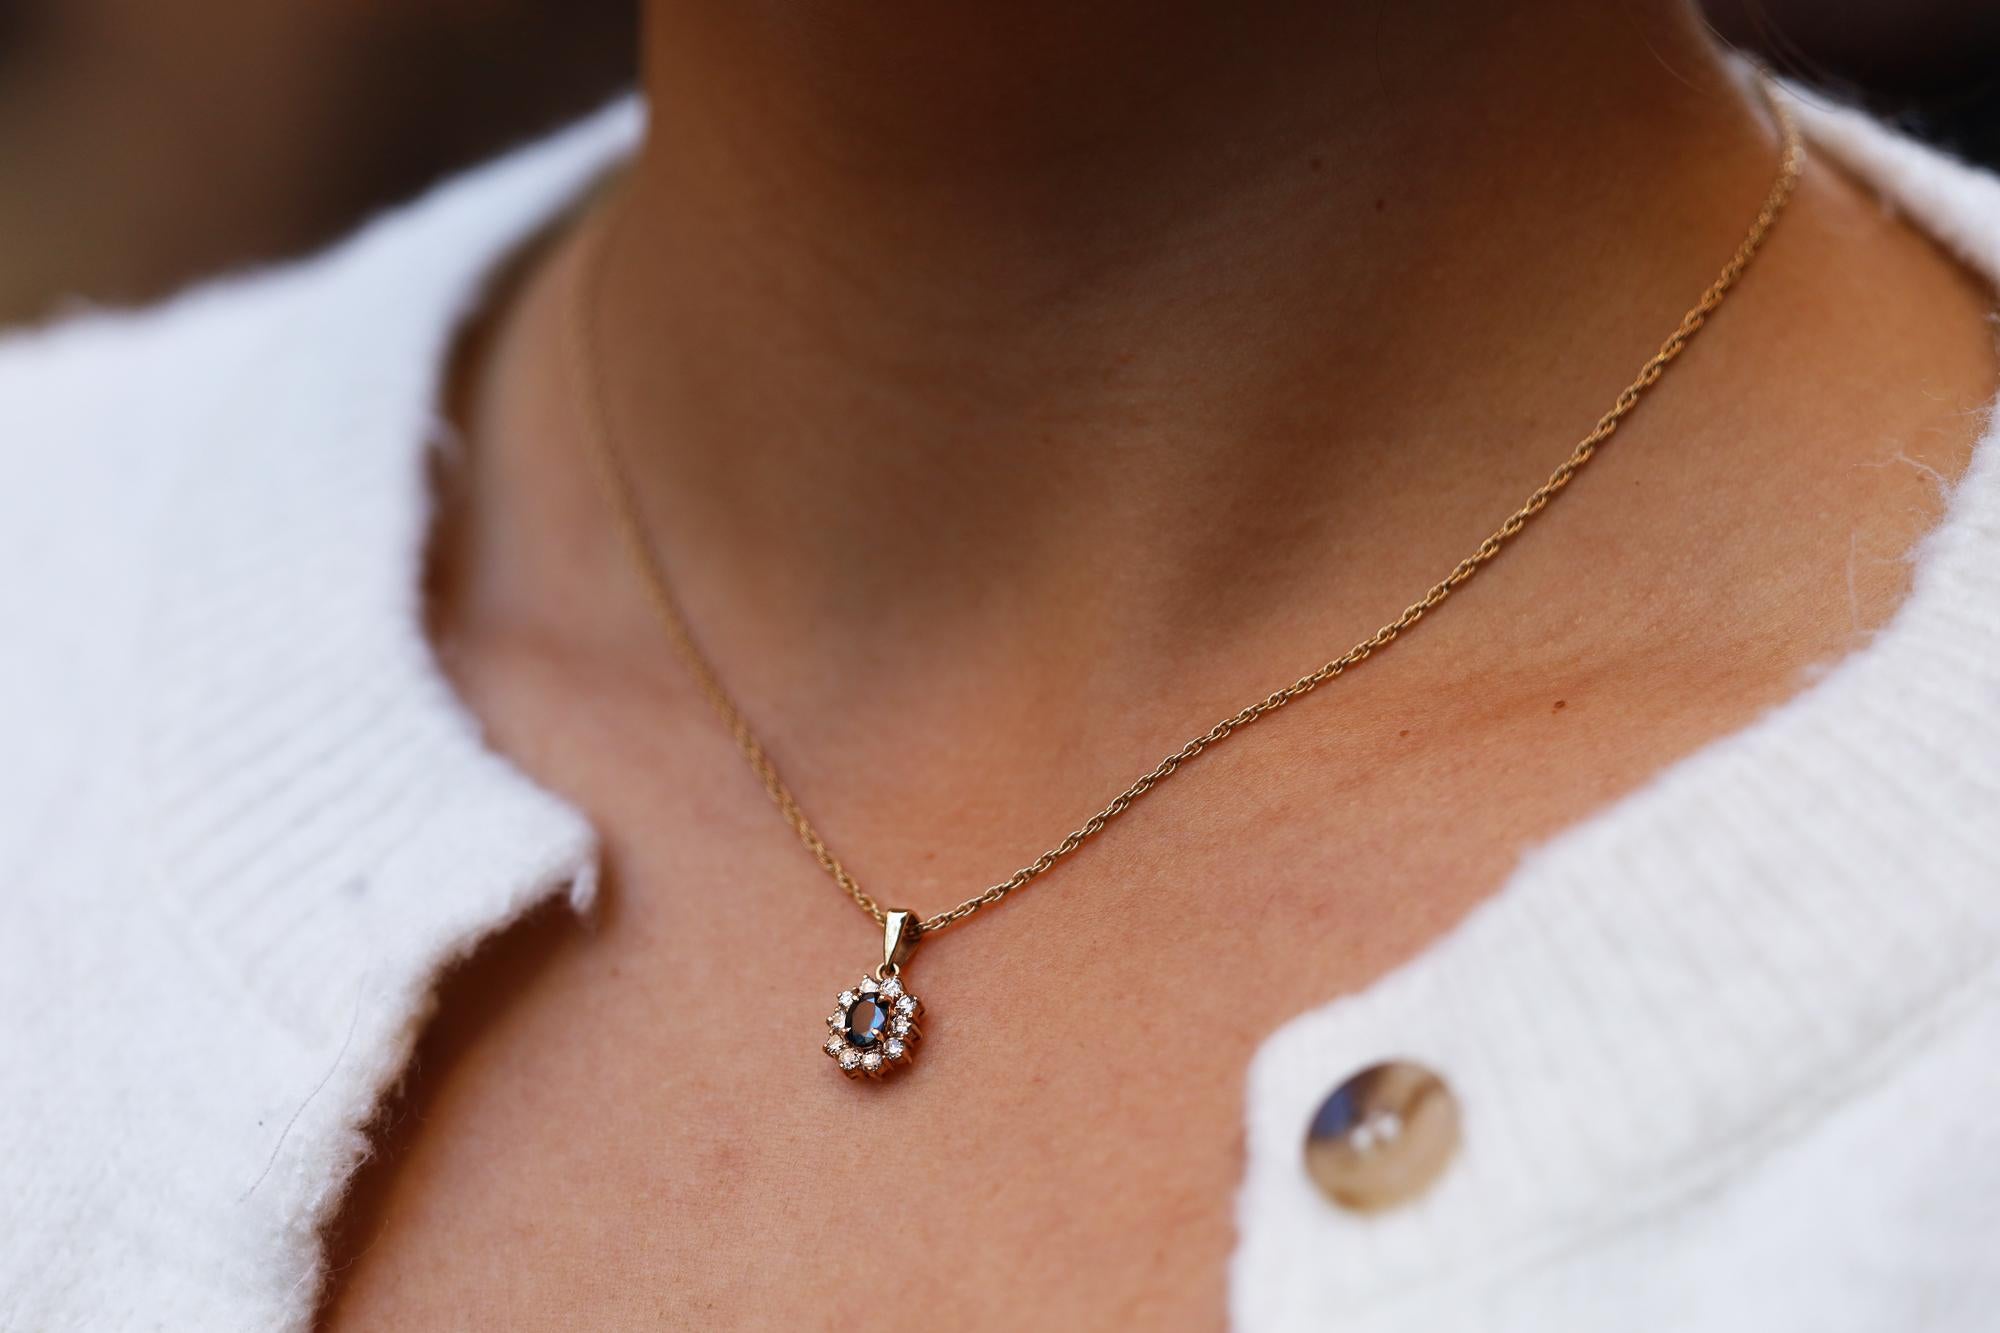 Vintage and affordable, this estate necklace is a perfect everyday pendant. An ever-popular halo design centered with a midnight blue oval sapphire weighing 0.48 carats, encircled with 10 sparkling round brilliant diamonds. Made with 14 karat yellow